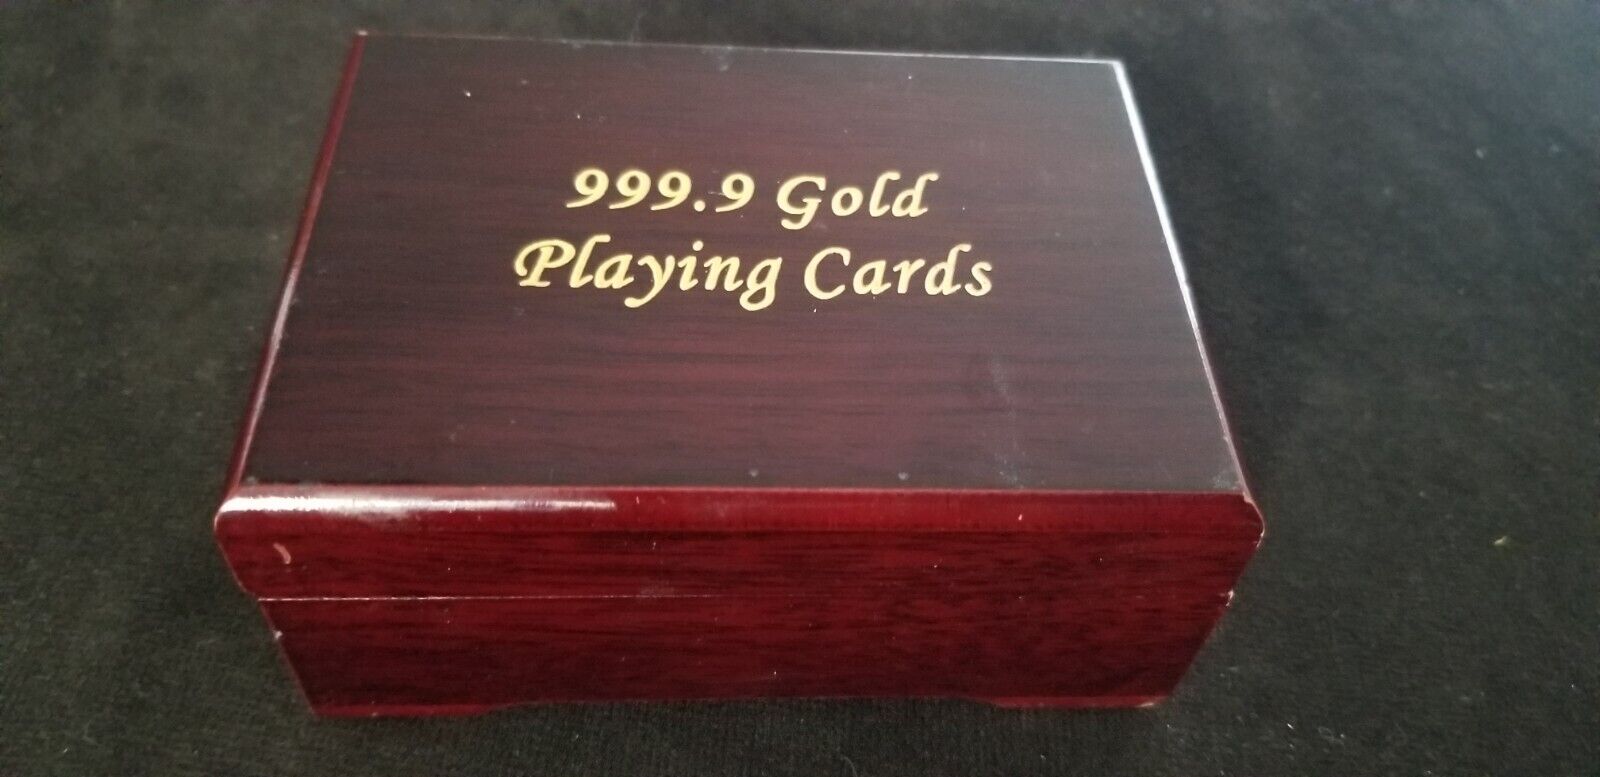 999.9 GOLD FOIL PLAYING CARDS COMPLETE IN PORTABLE WOOD BOX